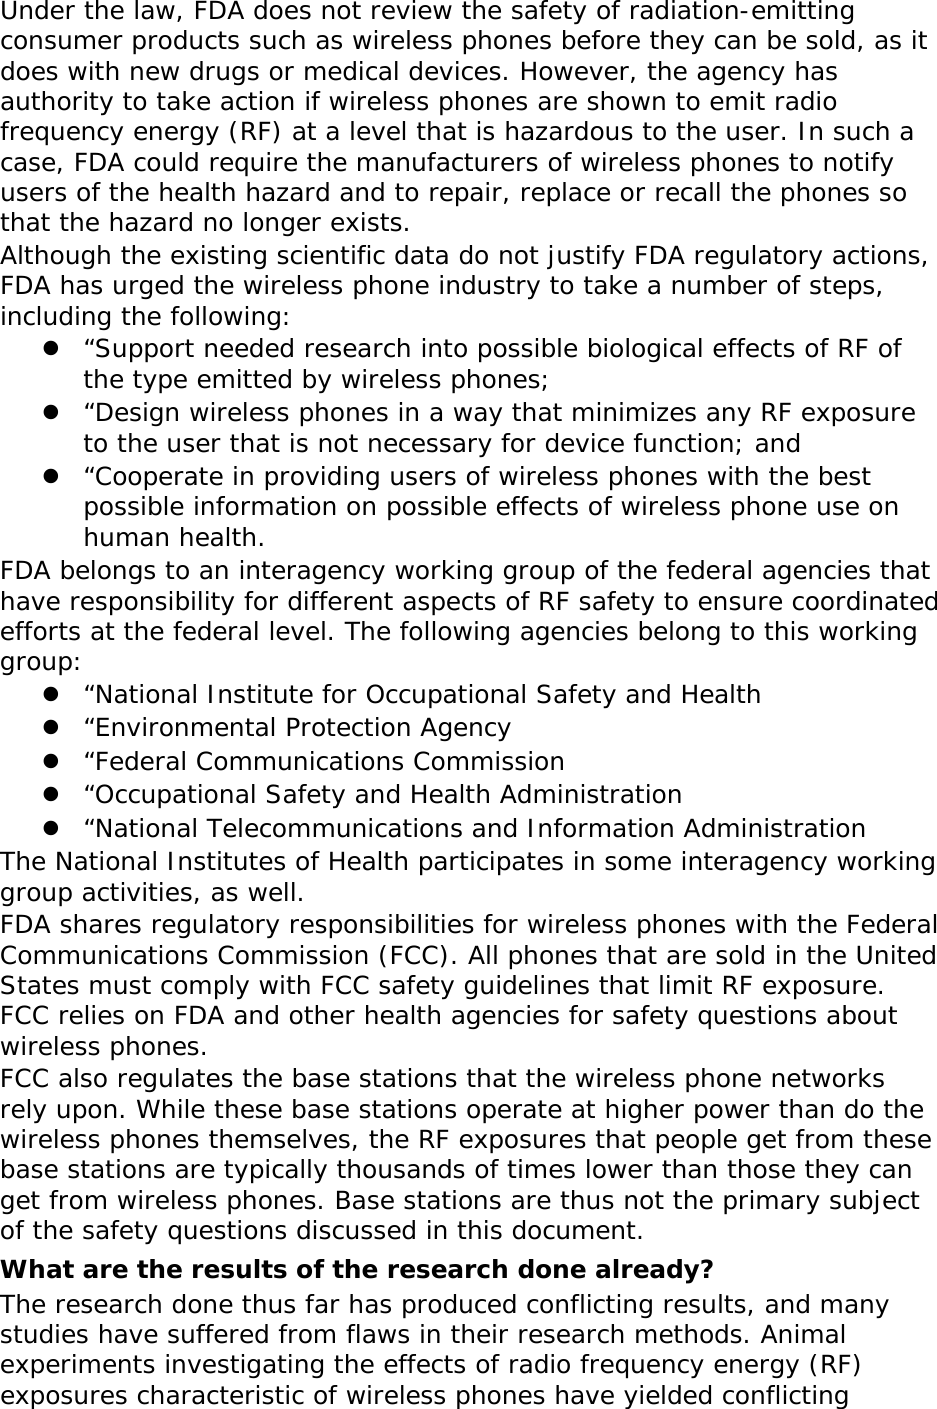 Under the law, FDA does not review the safety of radiation-emitting consumer products such as wireless phones before they can be sold, as it does with new drugs or medical devices. However, the agency has authority to take action if wireless phones are shown to emit radio frequency energy (RF) at a level that is hazardous to the user. In such a case, FDA could require the manufacturers of wireless phones to notify users of the health hazard and to repair, replace or recall the phones so that the hazard no longer exists. Although the existing scientific data do not justify FDA regulatory actions, FDA has urged the wireless phone industry to take a number of steps, including the following:  “Support needed research into possible biological effects of RF of the type emitted by wireless phones;  “Design wireless phones in a way that minimizes any RF exposure to the user that is not necessary for device function; and  “Cooperate in providing users of wireless phones with the best possible information on possible effects of wireless phone use on human health. FDA belongs to an interagency working group of the federal agencies that have responsibility for different aspects of RF safety to ensure coordinated efforts at the federal level. The following agencies belong to this working group:  “National Institute for Occupational Safety and Health  “Environmental Protection Agency  “Federal Communications Commission  “Occupational Safety and Health Administration  “National Telecommunications and Information Administration The National Institutes of Health participates in some interagency working group activities, as well. FDA shares regulatory responsibilities for wireless phones with the Federal Communications Commission (FCC). All phones that are sold in the United States must comply with FCC safety guidelines that limit RF exposure. FCC relies on FDA and other health agencies for safety questions about wireless phones. FCC also regulates the base stations that the wireless phone networks rely upon. While these base stations operate at higher power than do the wireless phones themselves, the RF exposures that people get from these base stations are typically thousands of times lower than those they can get from wireless phones. Base stations are thus not the primary subject of the safety questions discussed in this document. What are the results of the research done already? The research done thus far has produced conflicting results, and many studies have suffered from flaws in their research methods. Animal experiments investigating the effects of radio frequency energy (RF) exposures characteristic of wireless phones have yielded conflicting 